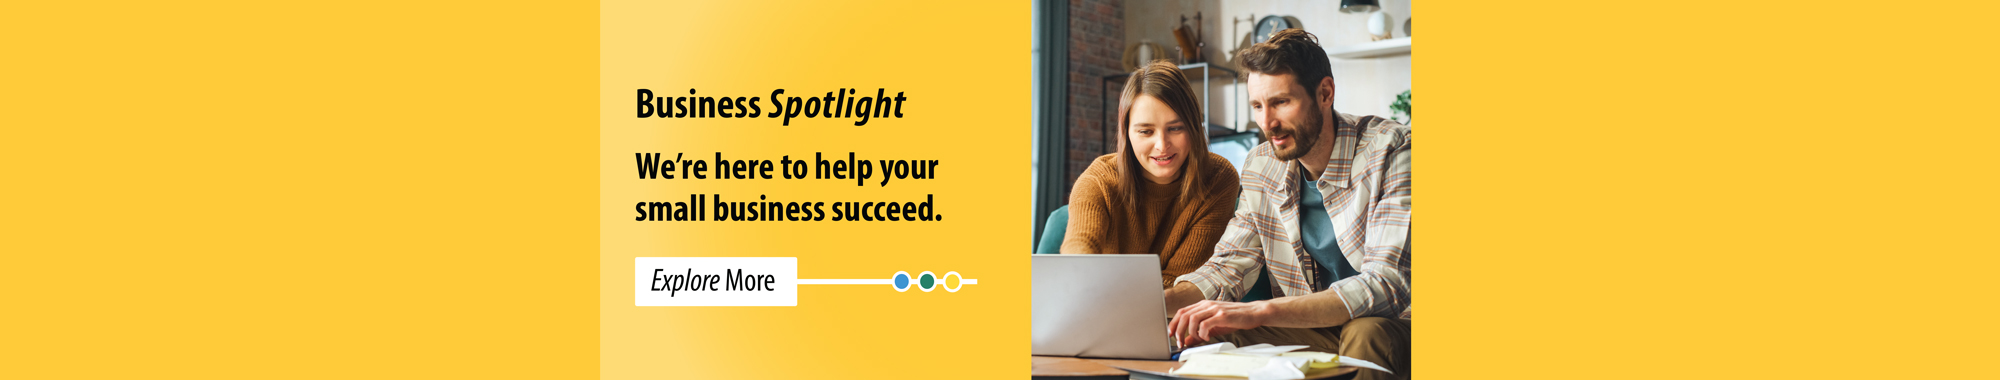 We're here to help your small business succeed. Explore more.